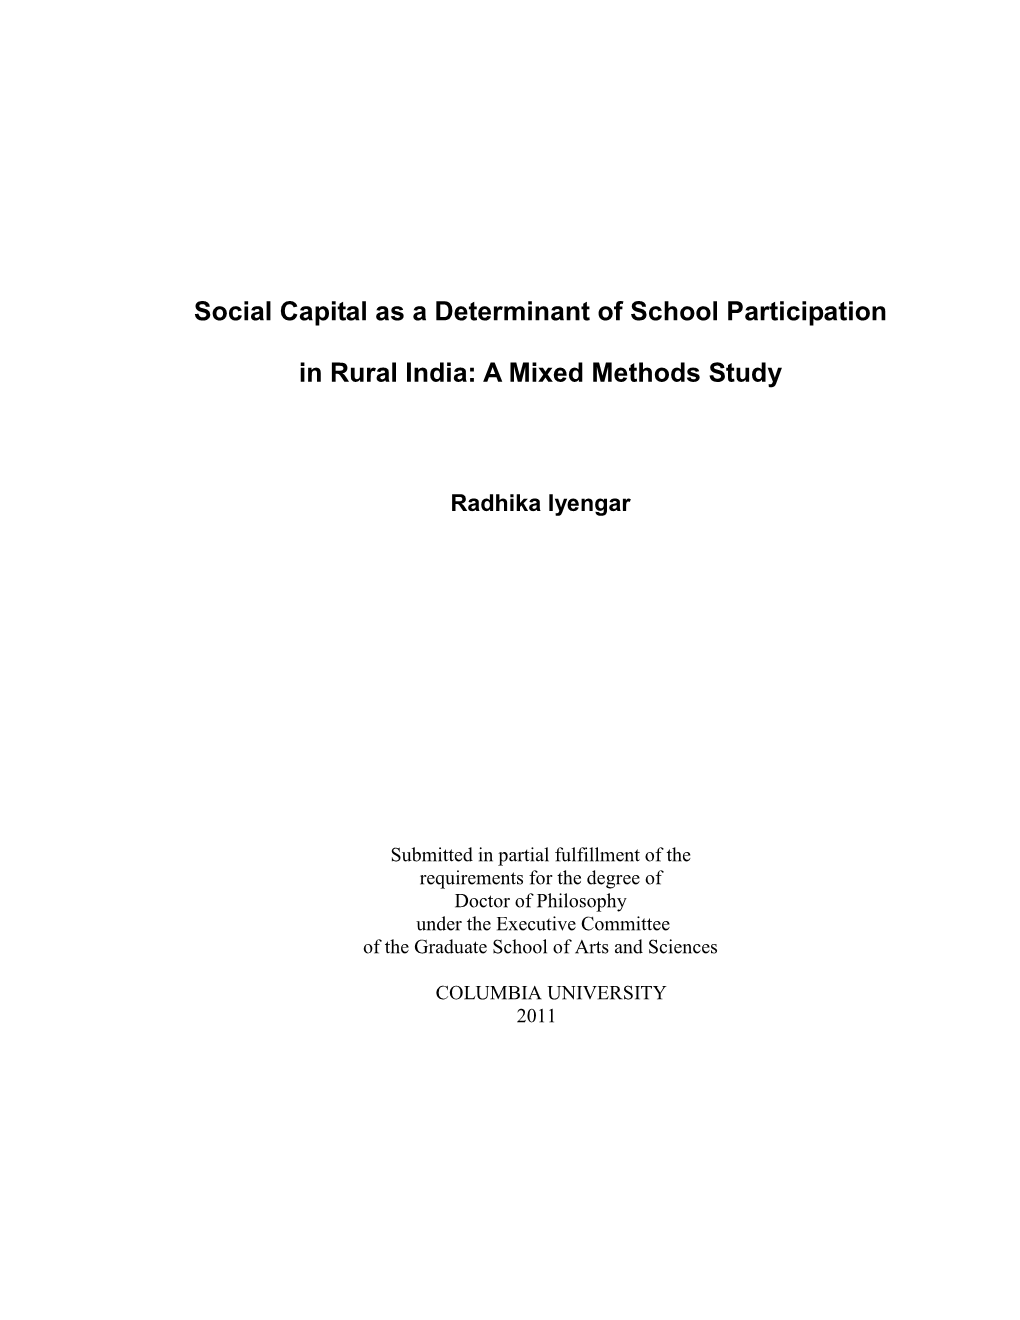 Social Capital As a Determinant of School Participation in Rural India: a Mixed Methods Study